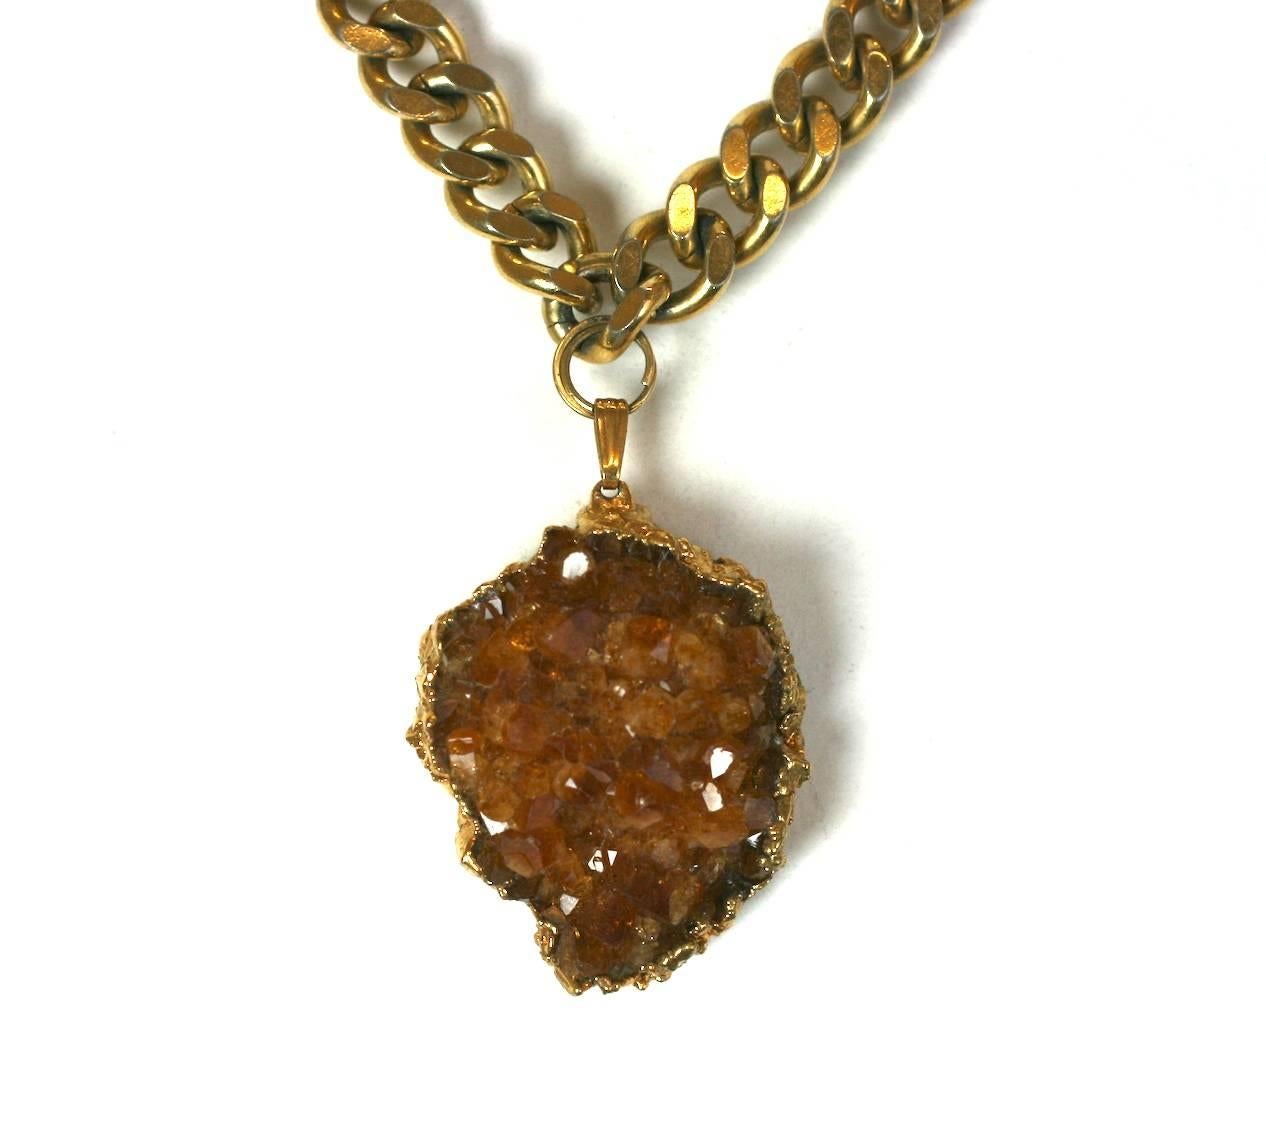 Attractive Citrine Geode Pendant from the 1960's. A citrine crystal is suspended from a gilt curb link chain. 1960's USA. Excellent condition. 
Chain 15" x .33". Pendant 1.5" x 1". 